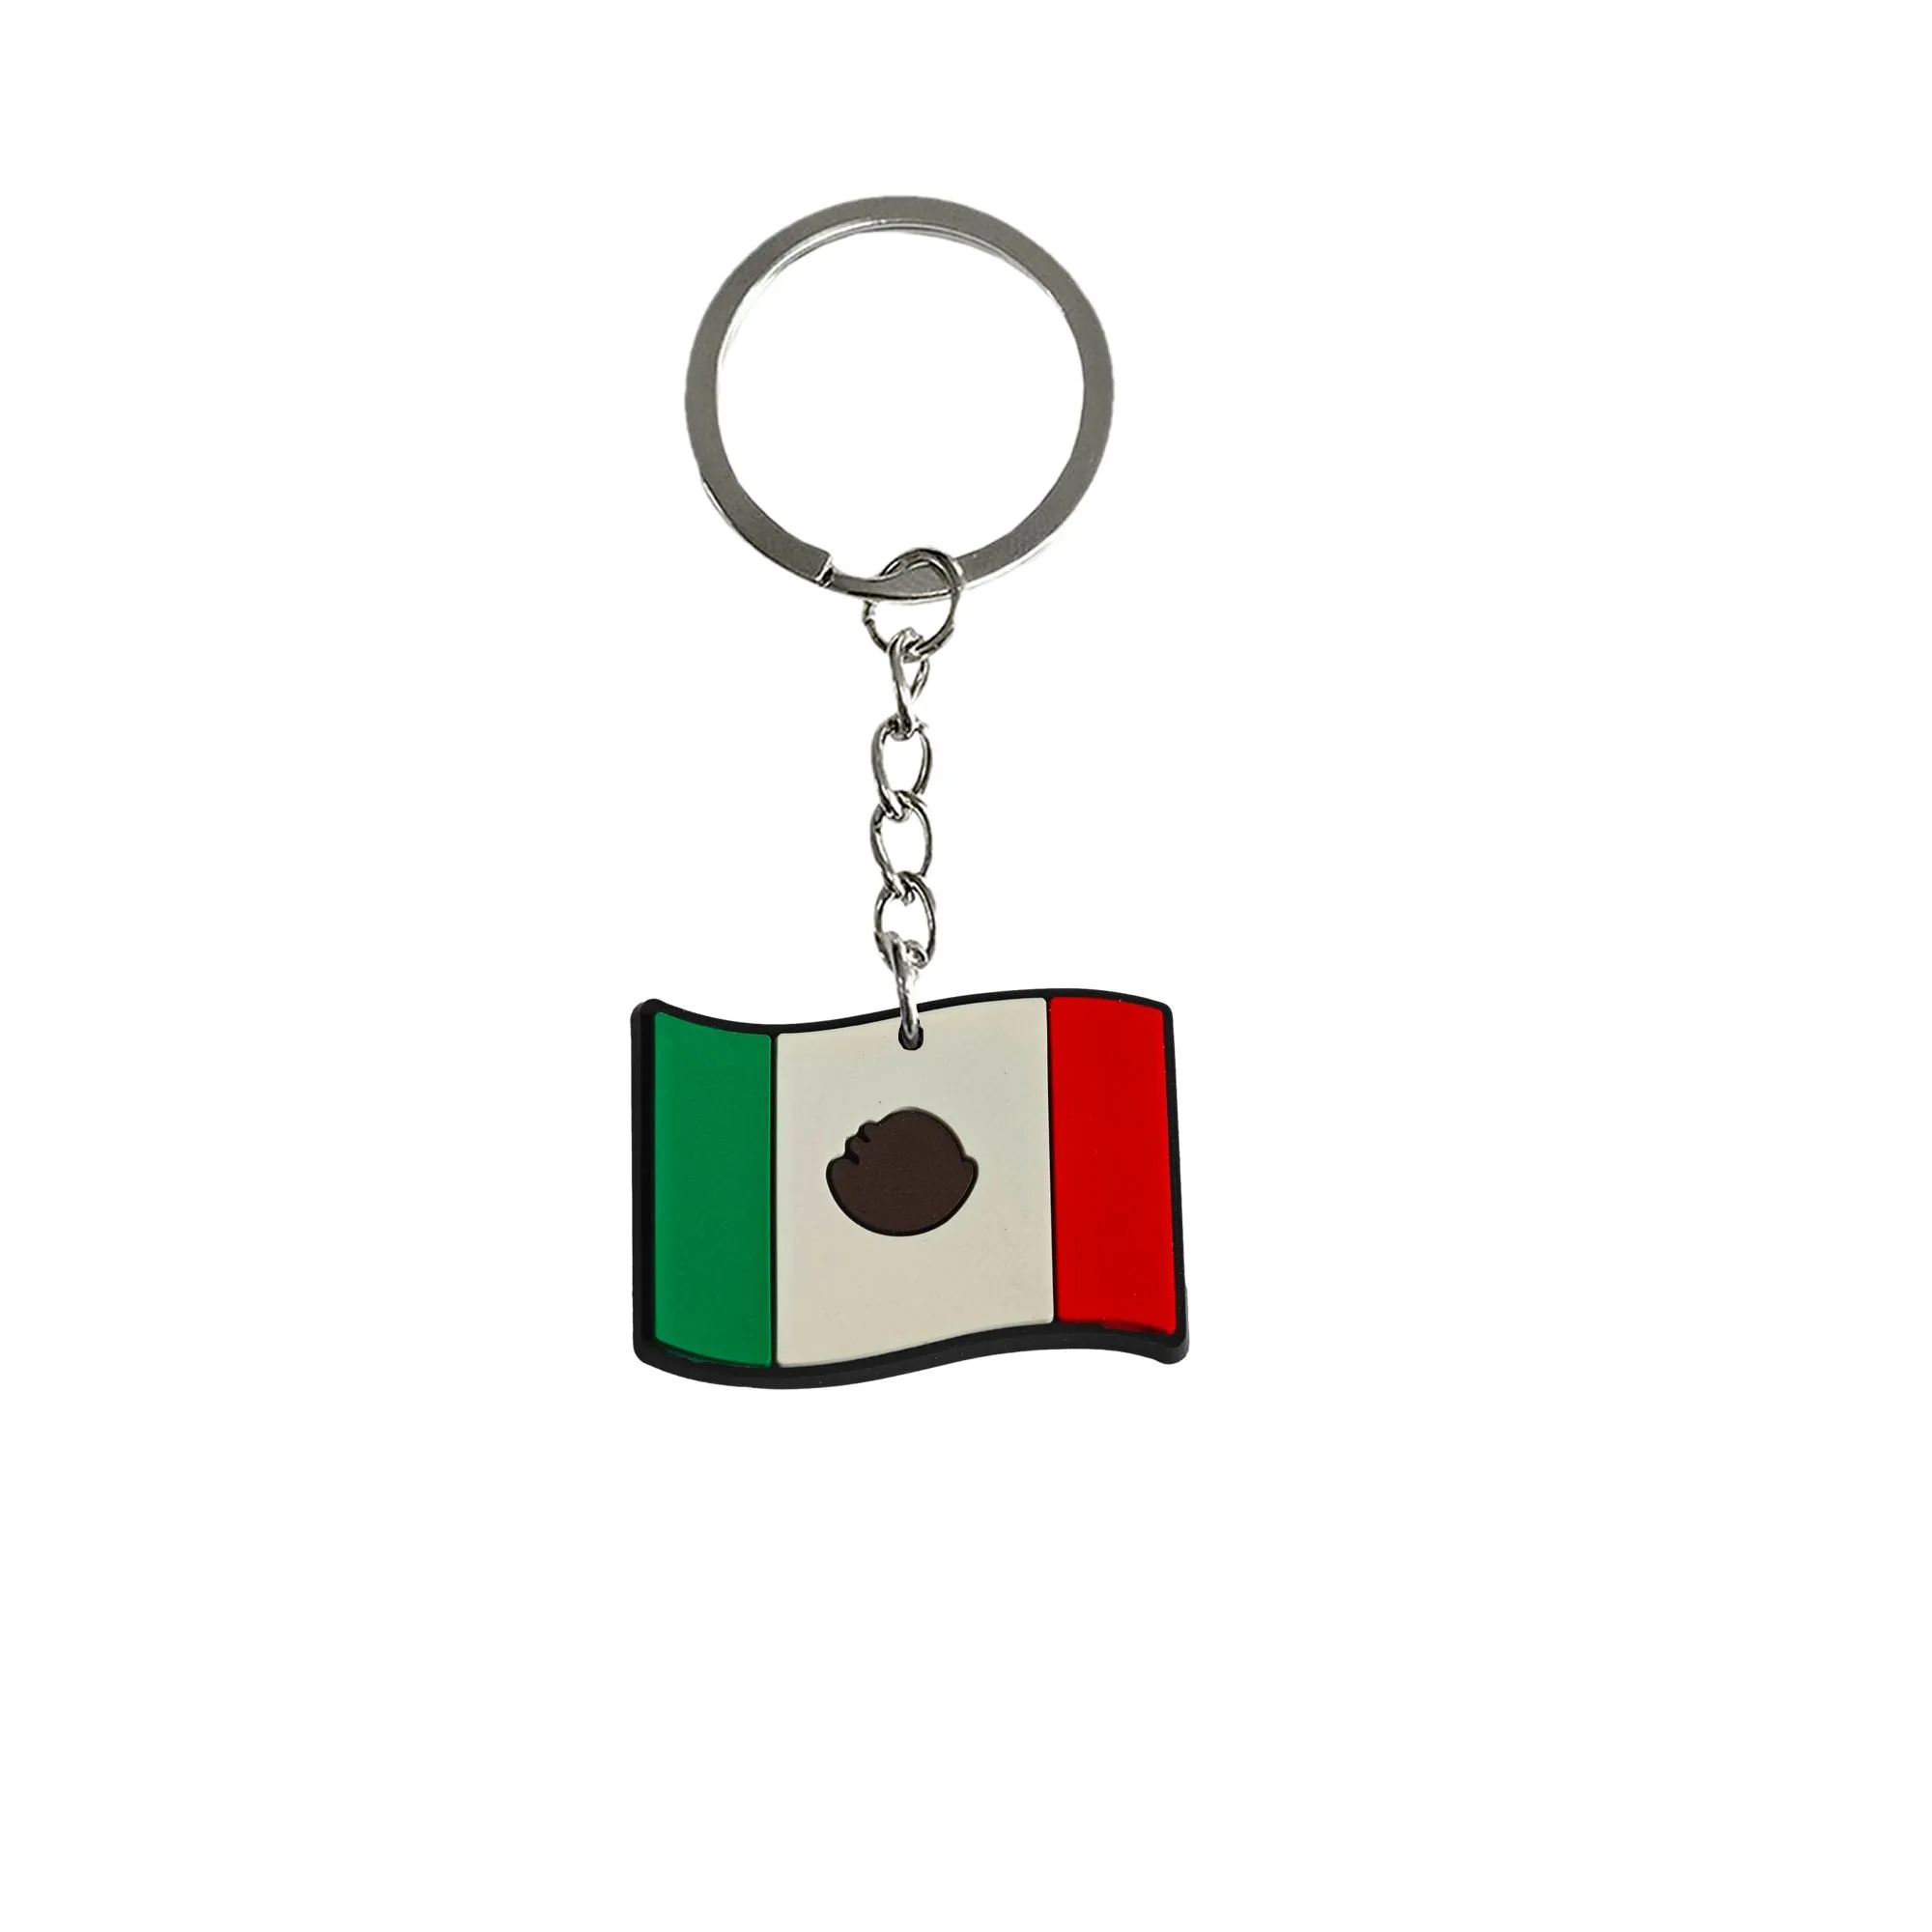 national flag keychain for tags goodie bag stuffer christmas gifts key chain ring gift fans rings keyring suitable schoolbag keychains backpack car girls